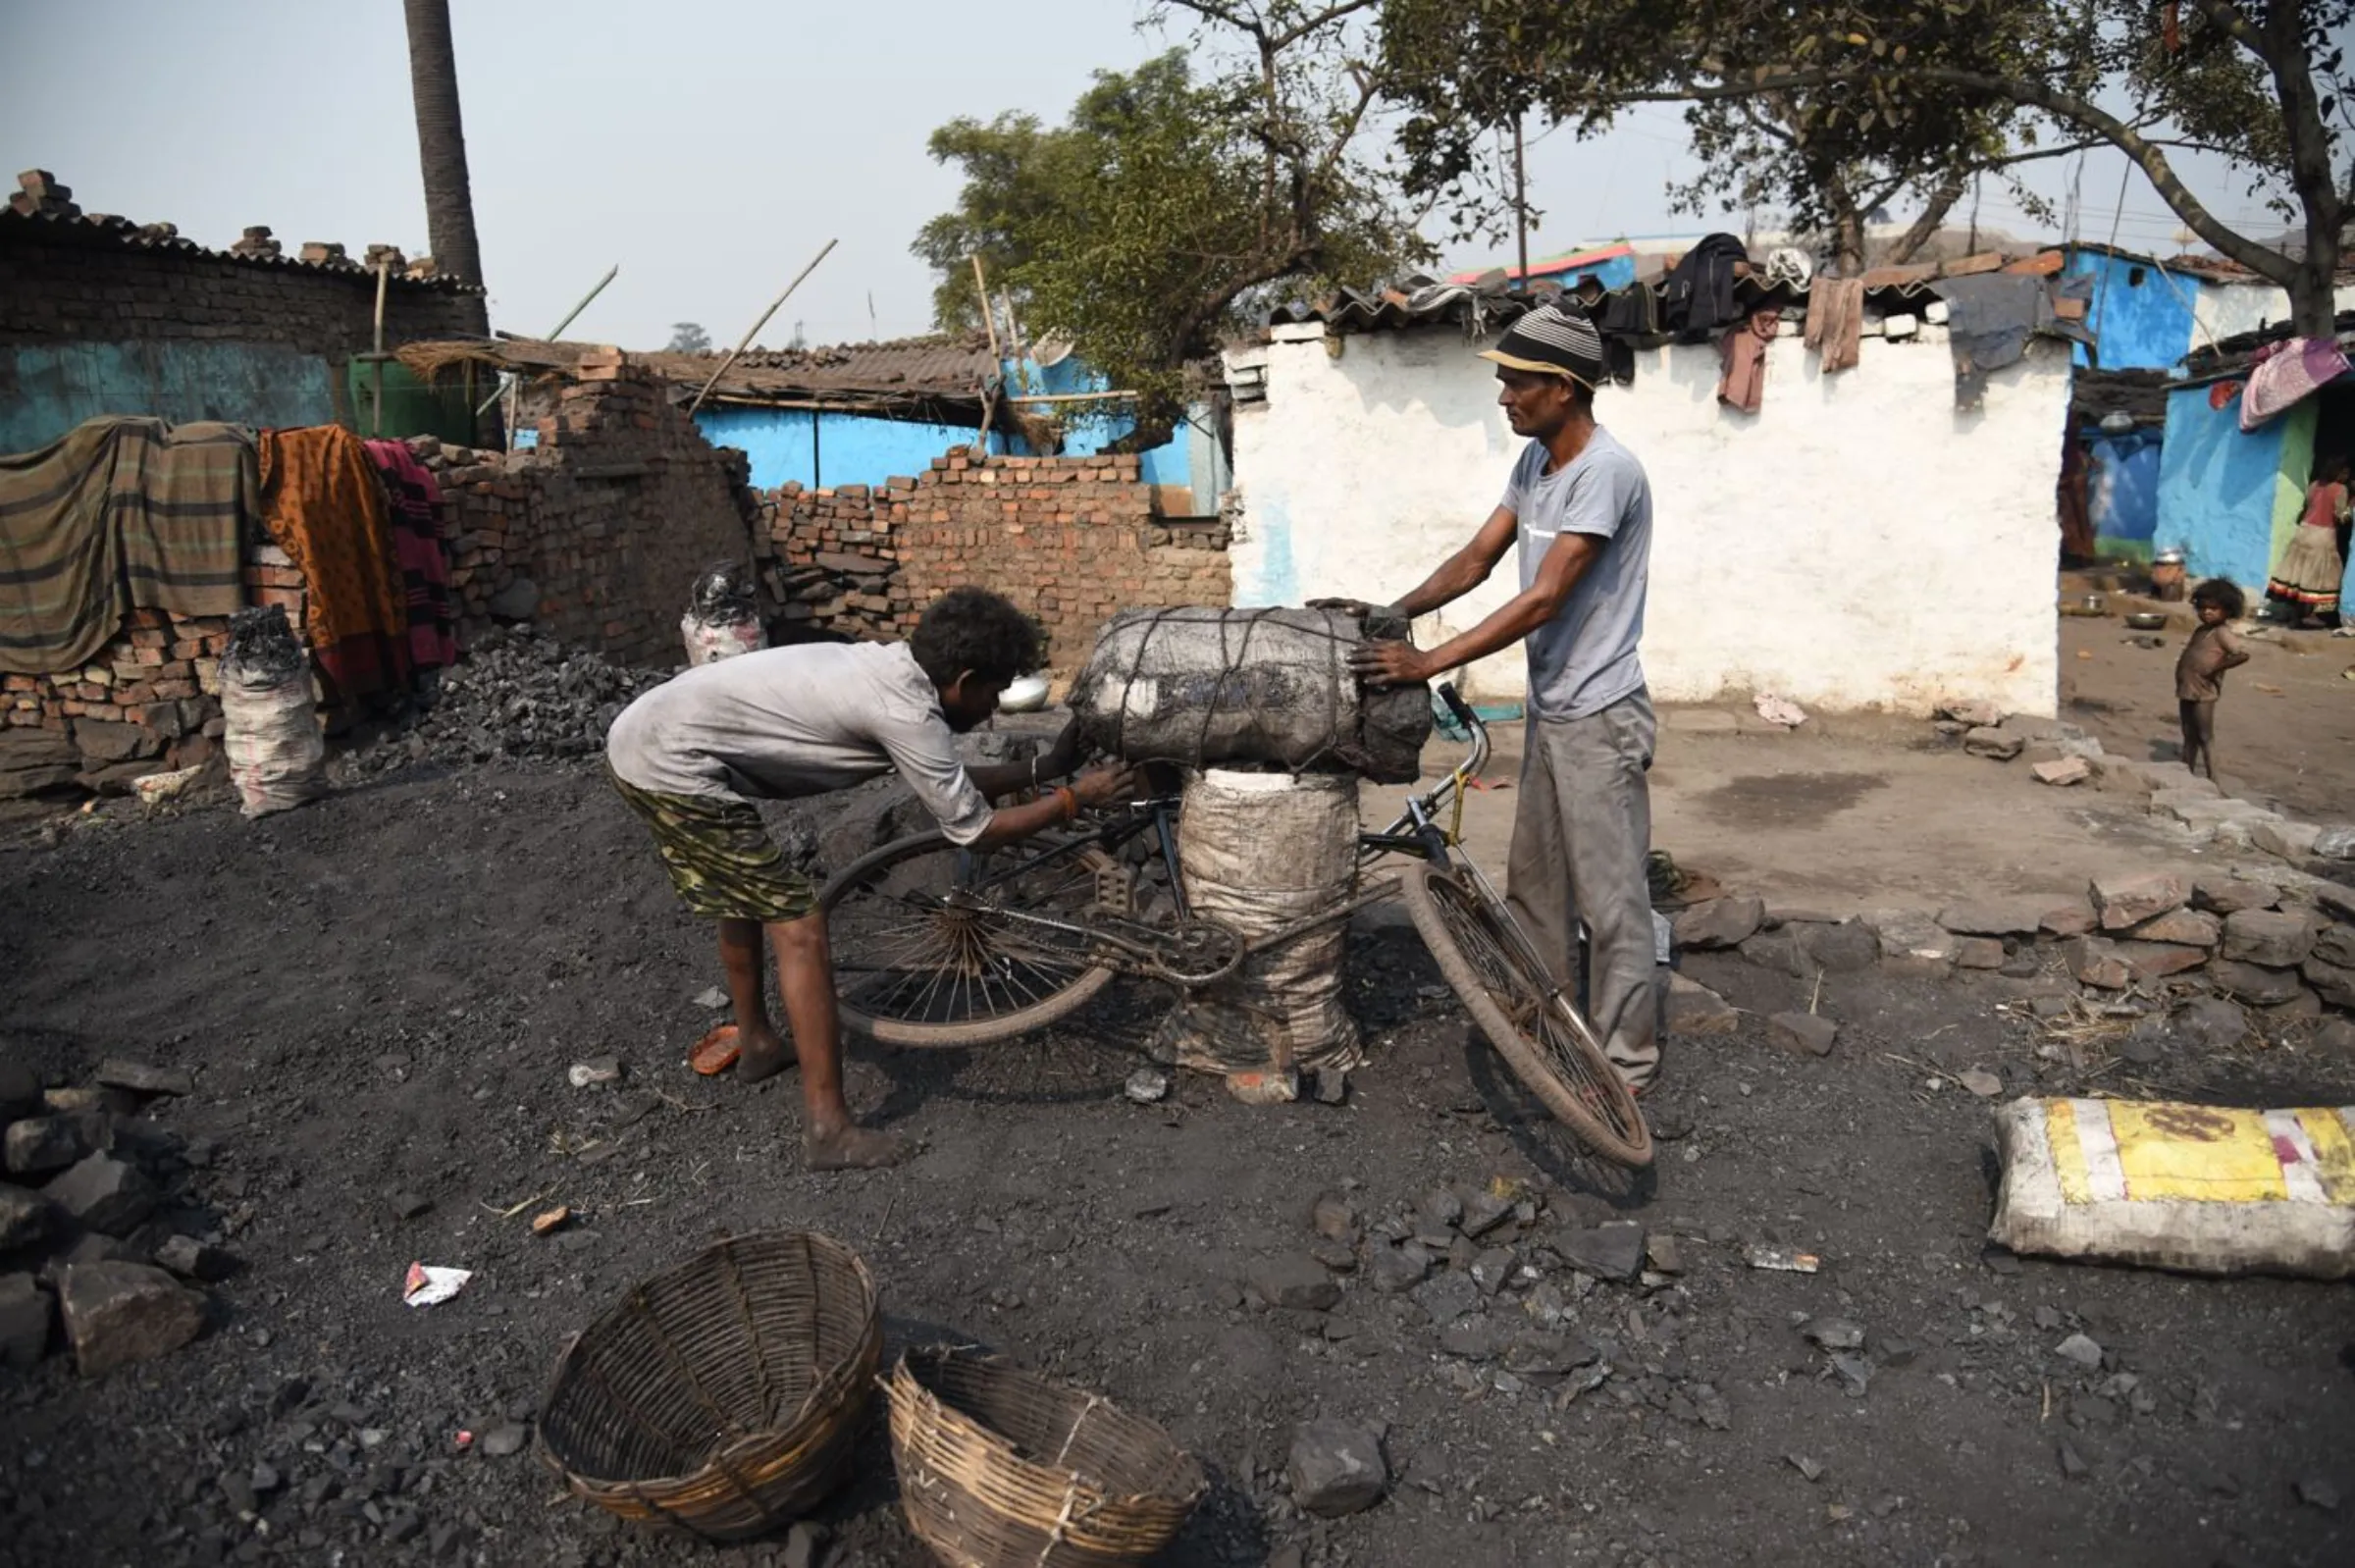 A man ties sacks of stolen coal to a bicycle in Jharia, India, November 10, 2022. Thomson Reuters Foundation/Tanmoy Bhaduri